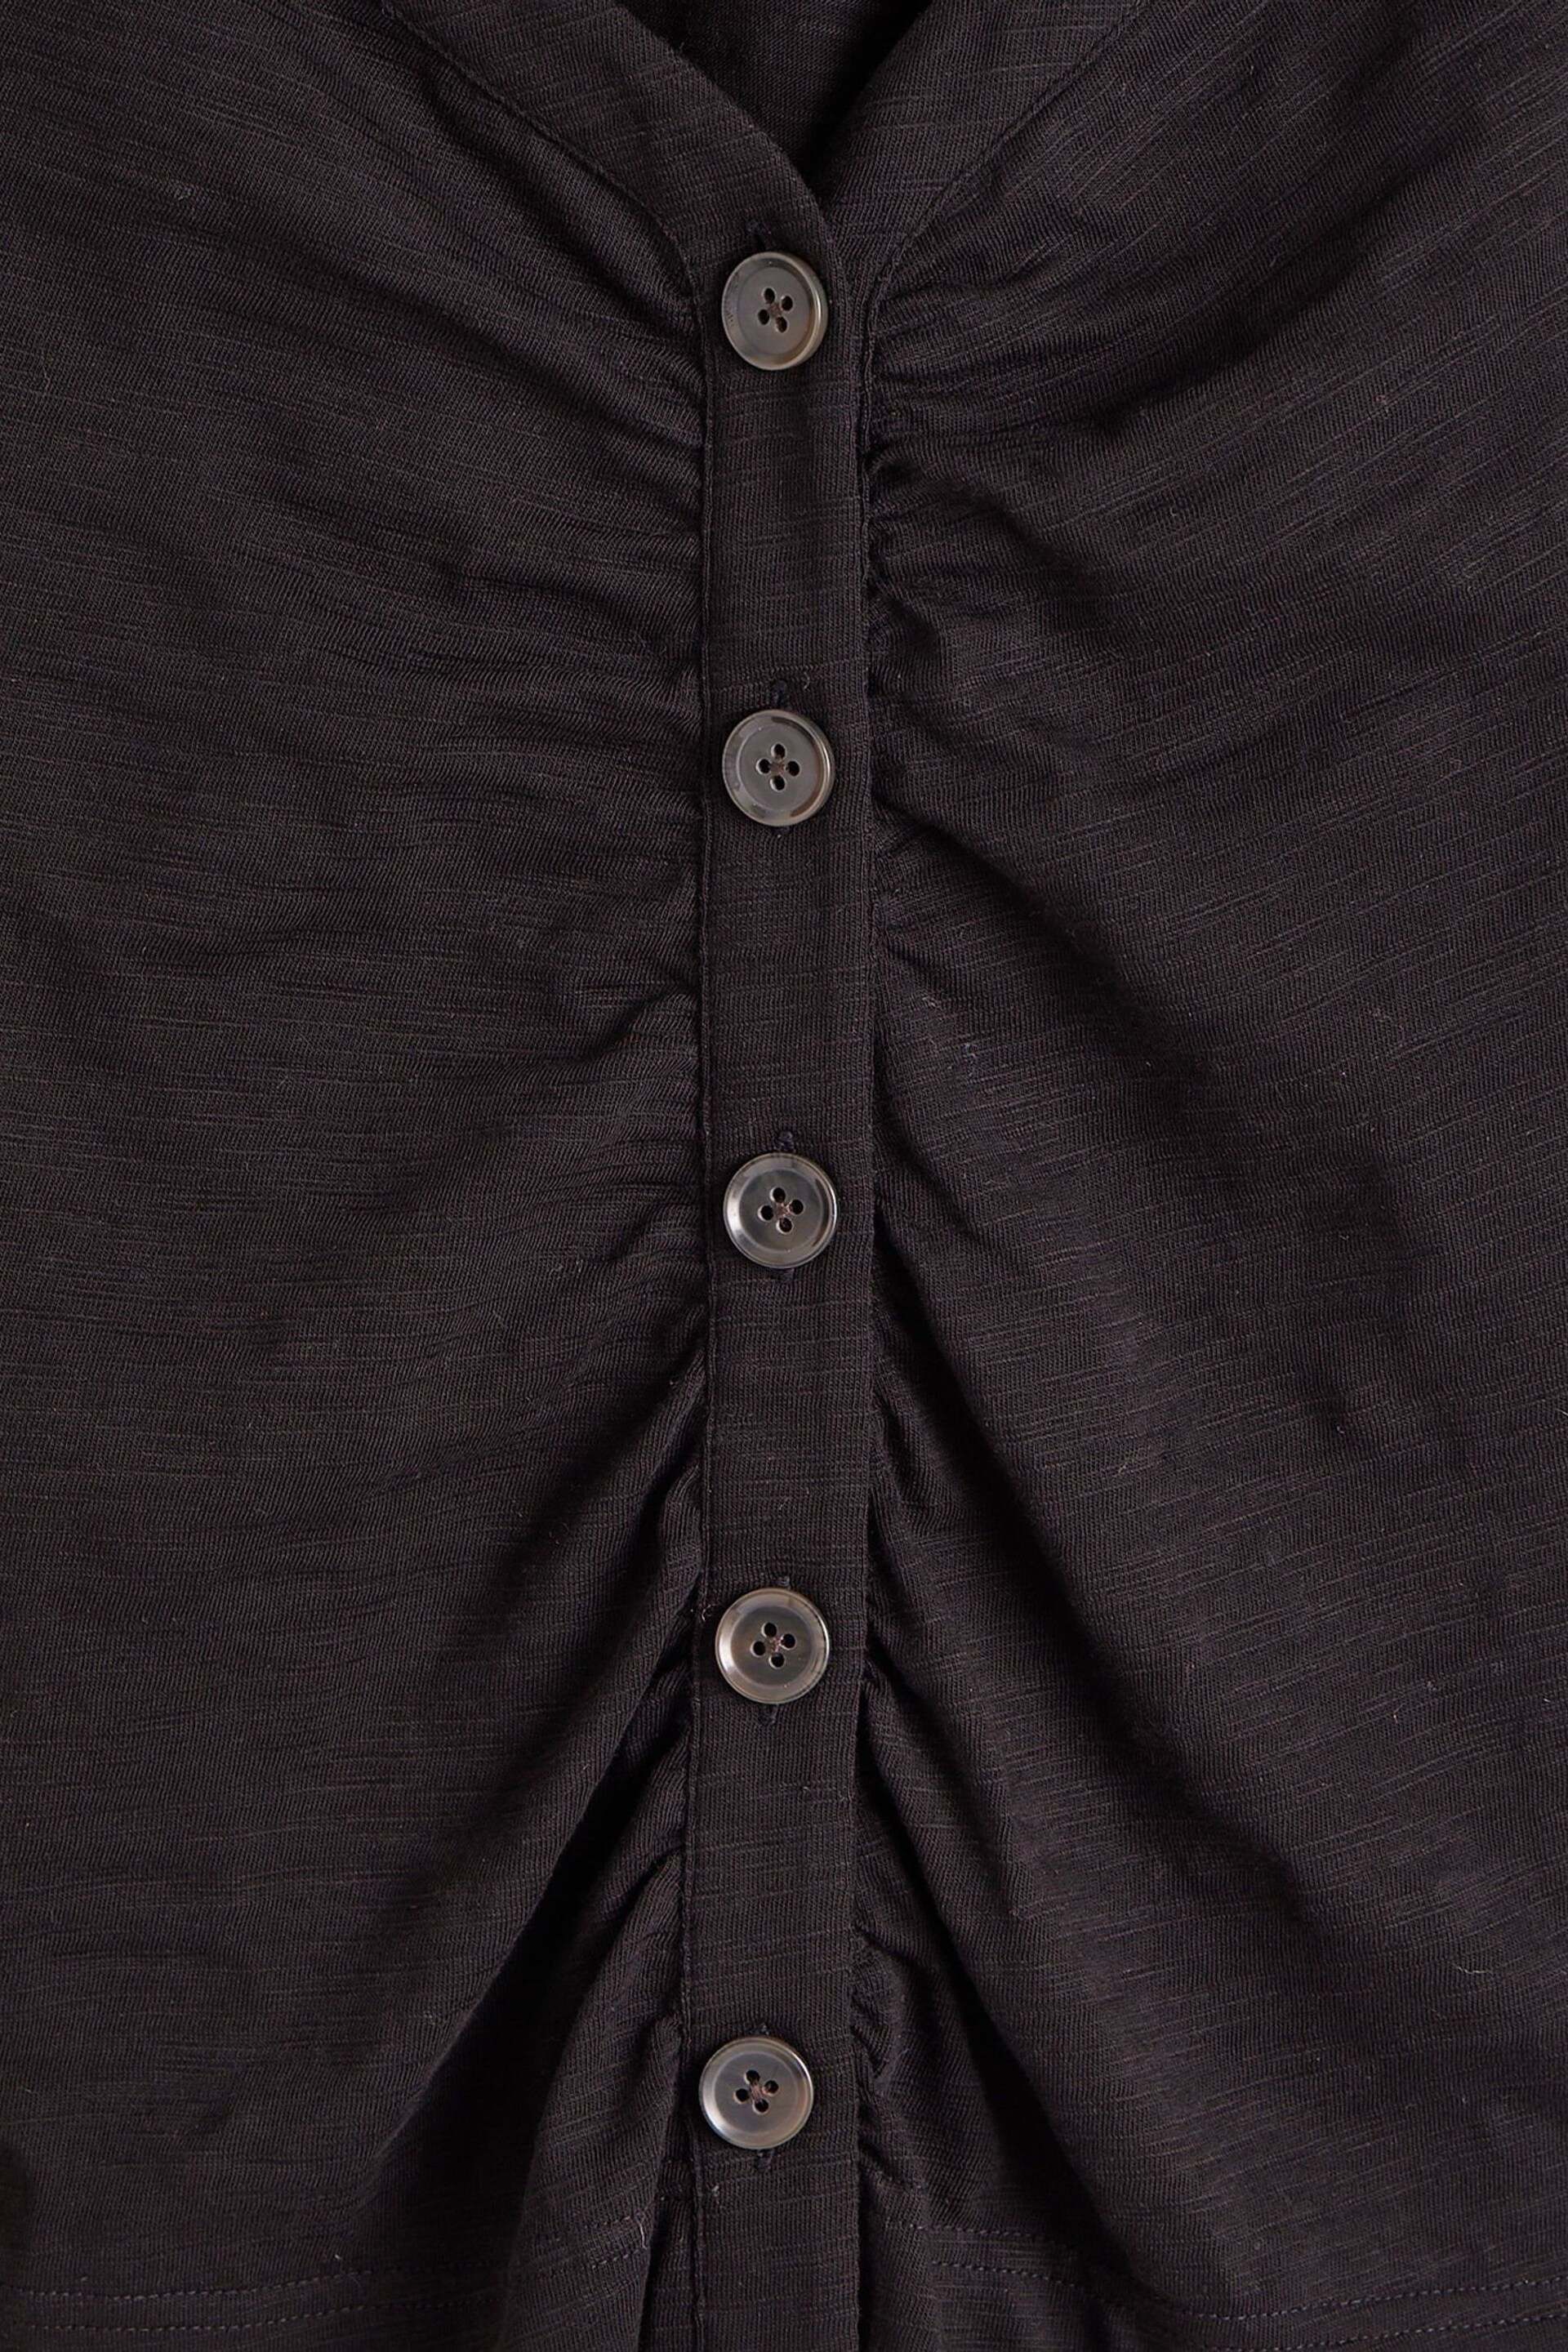 Oliver Bonas Black Button Up Ruched Jersey Shirt - Image 7 of 7